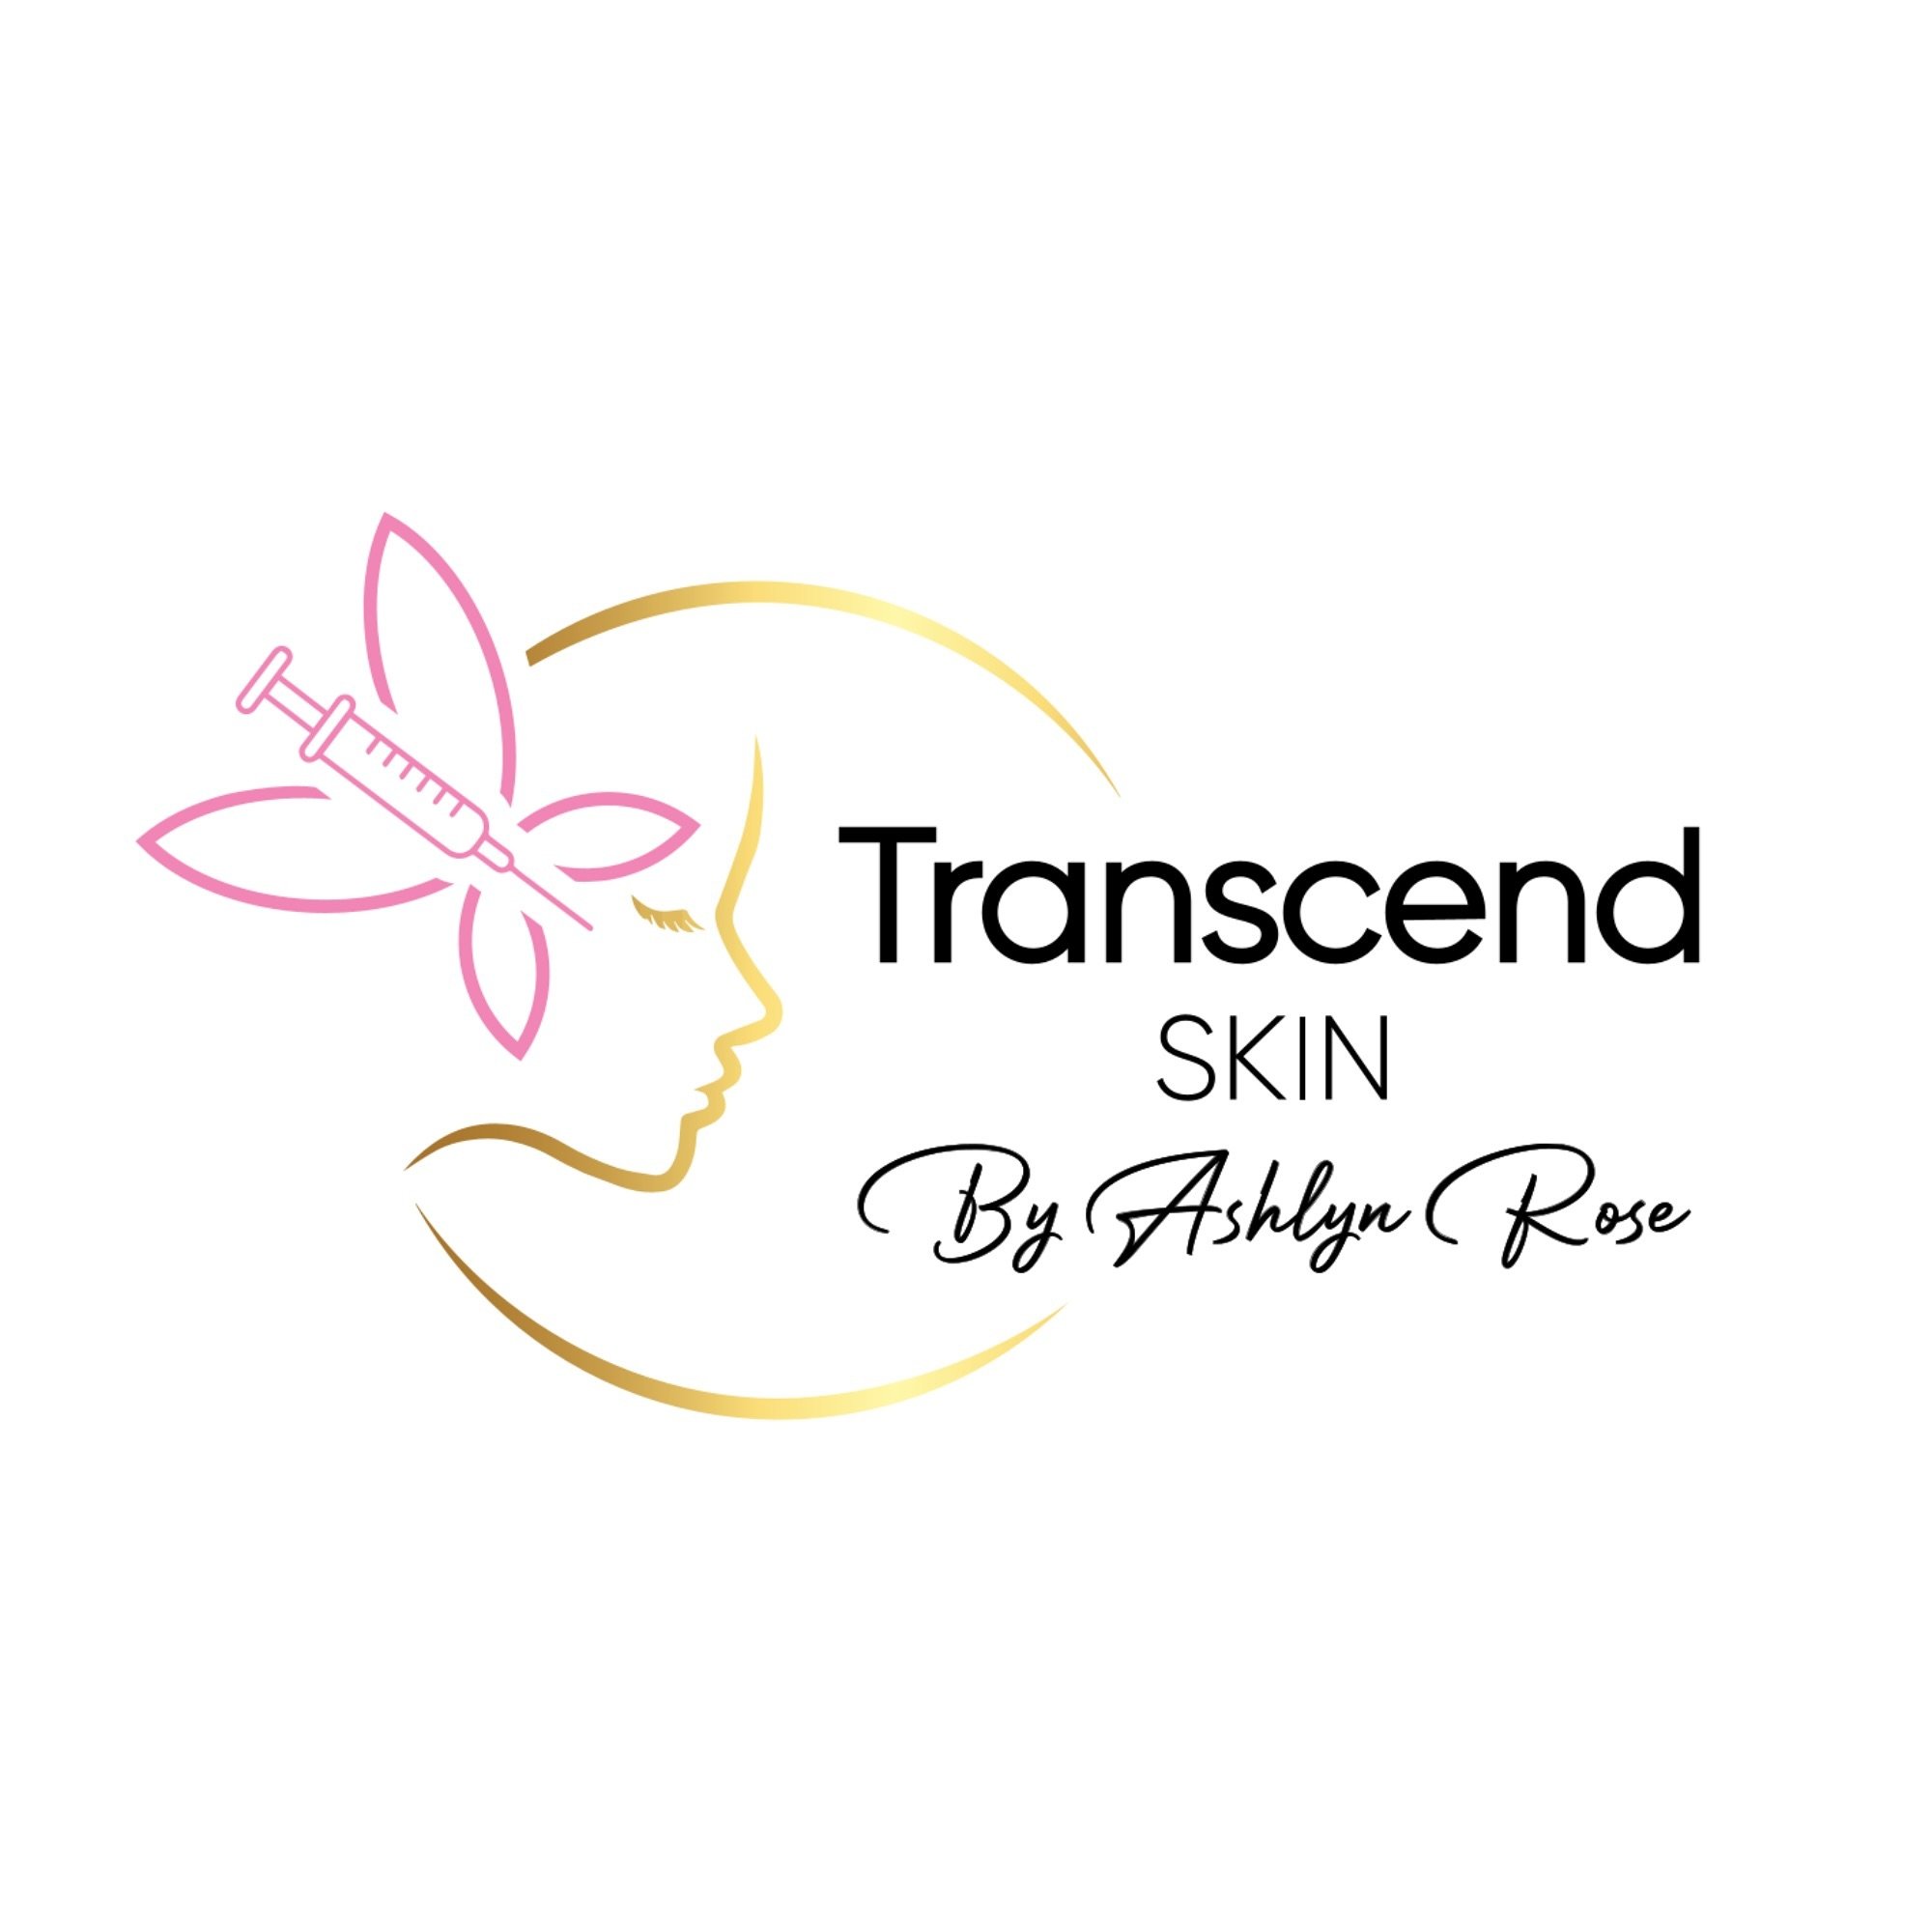 The gorgeous Ashlyn, Registered Nurse from Transcend Skin by Ashlyn Rose is with us again this Tuesday. Ashlyn provides Cosmetic Injectable services at Katra Beauty every Tuesday and Saturdays by appointment ✨

To book, click on our link in the bio o